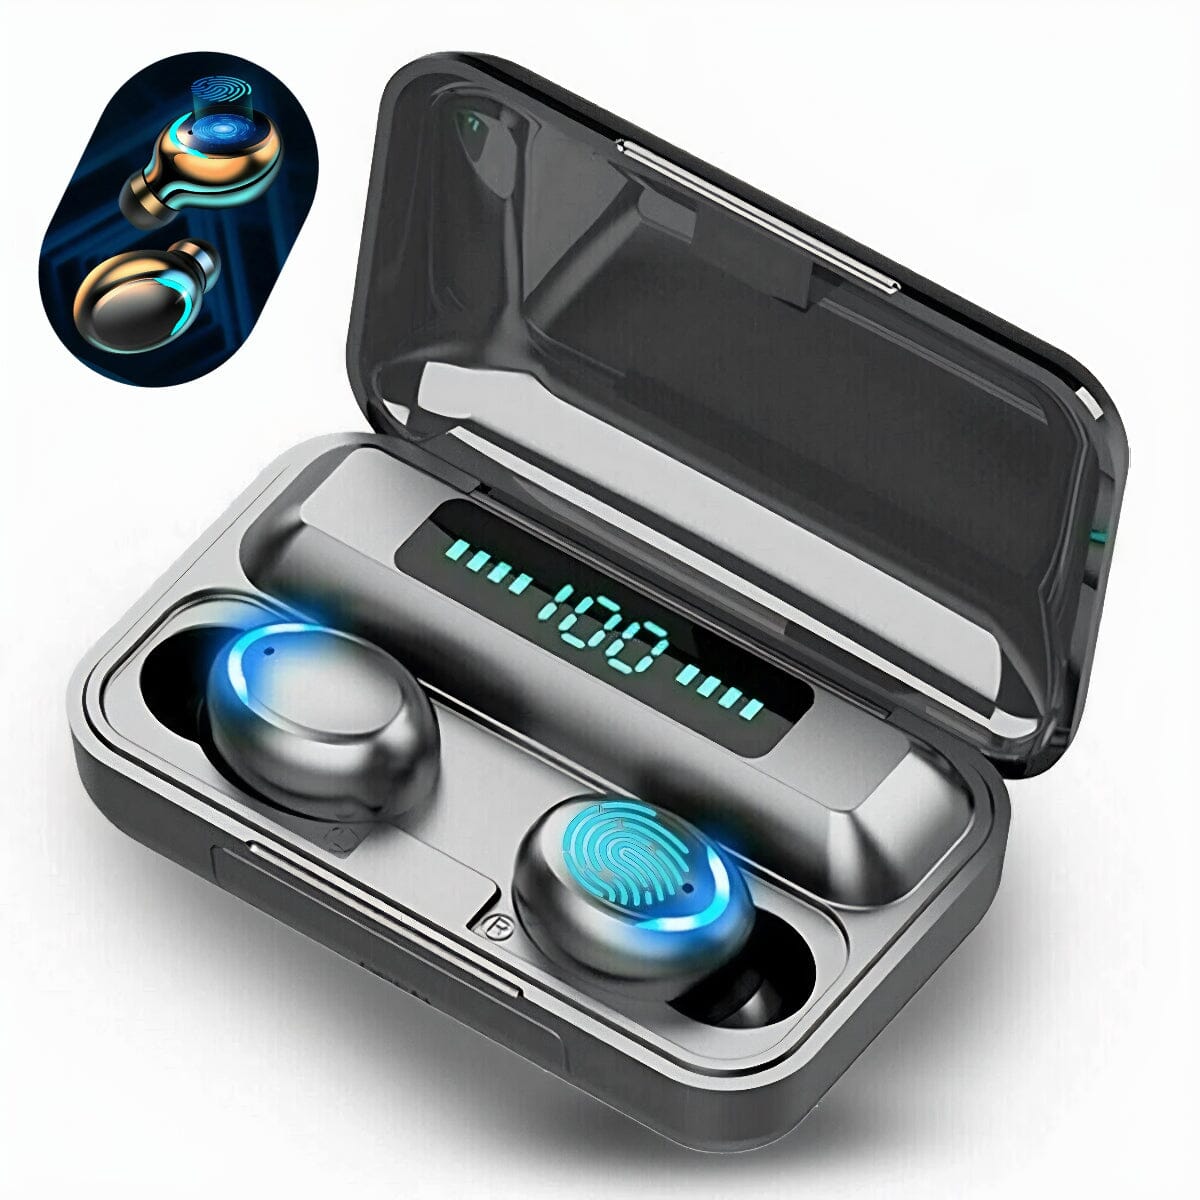 SMAXPRO™ In-Ear Bluetooth Earbuds: Charging Case, Mic (iOS/Android, TWS Wireless Earphones, Waterproof) bluetooth earbuds SMAXPRO™ 